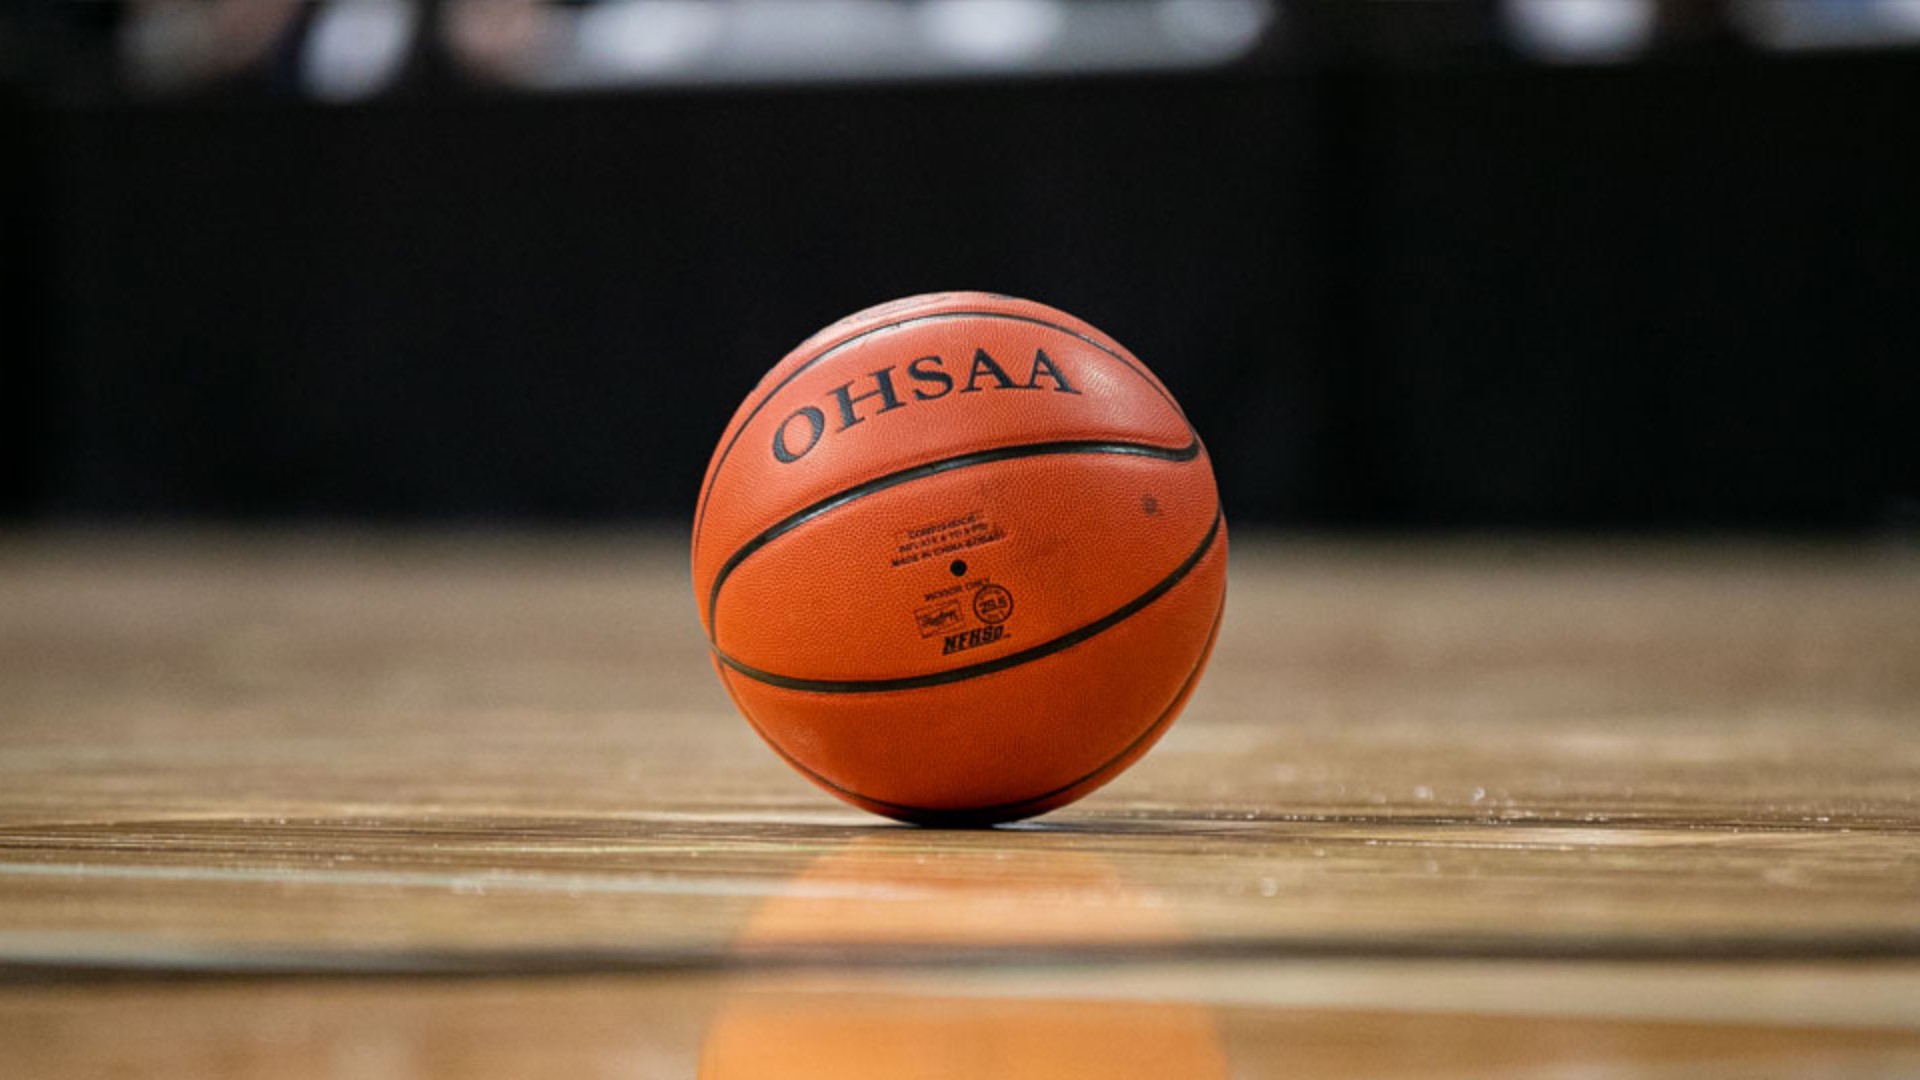 High school principals in Ohio have overwhelmingly rejected a proposal to allow prep athletes to sign deals cashing in on their name, likeness and image.